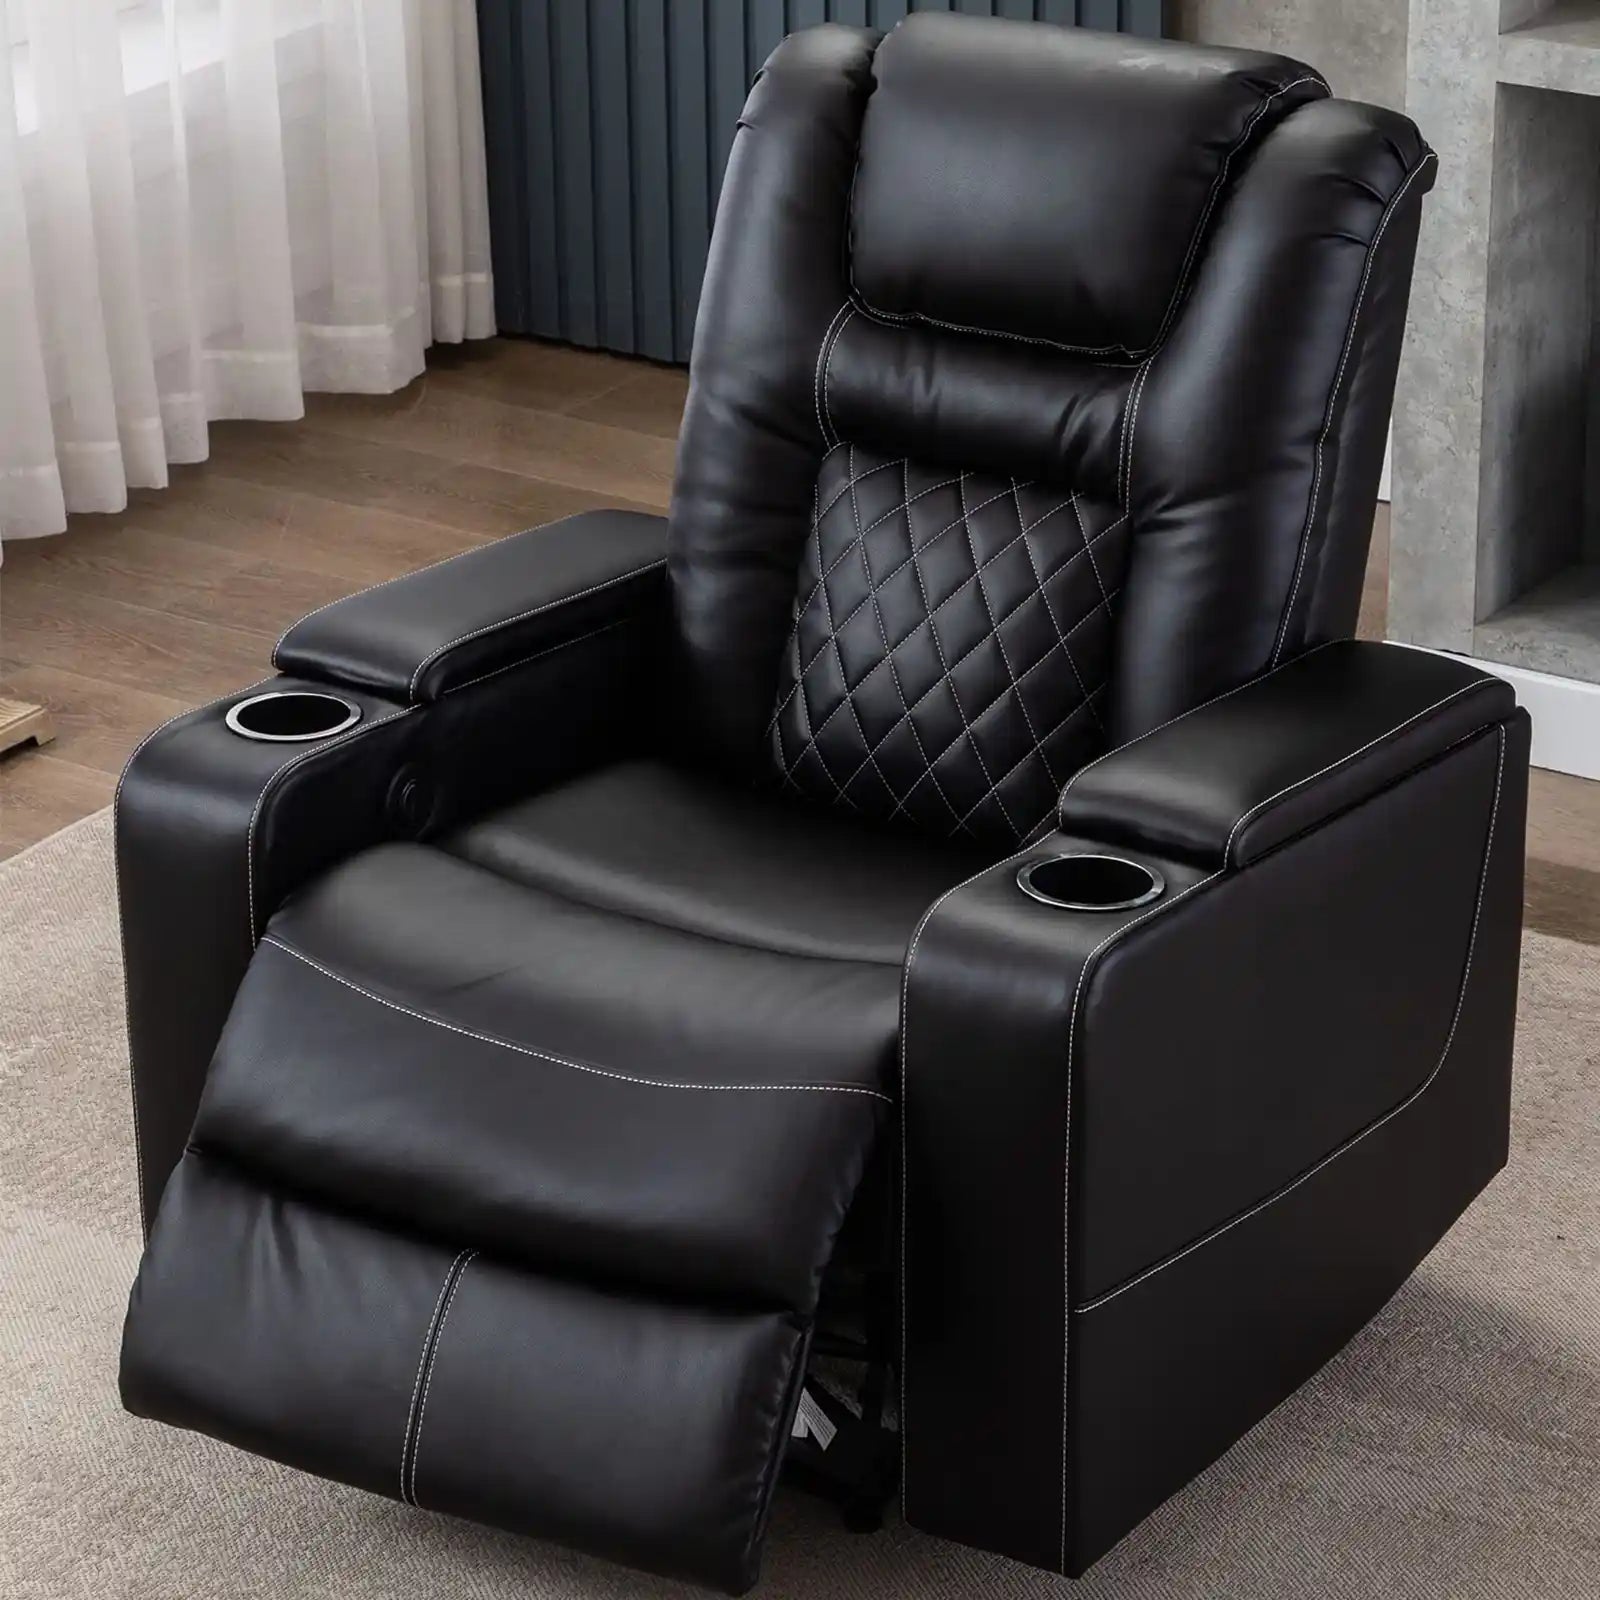 Electric Power Recliner Chair with USB Ports and Cup Holders, Breathable Leather